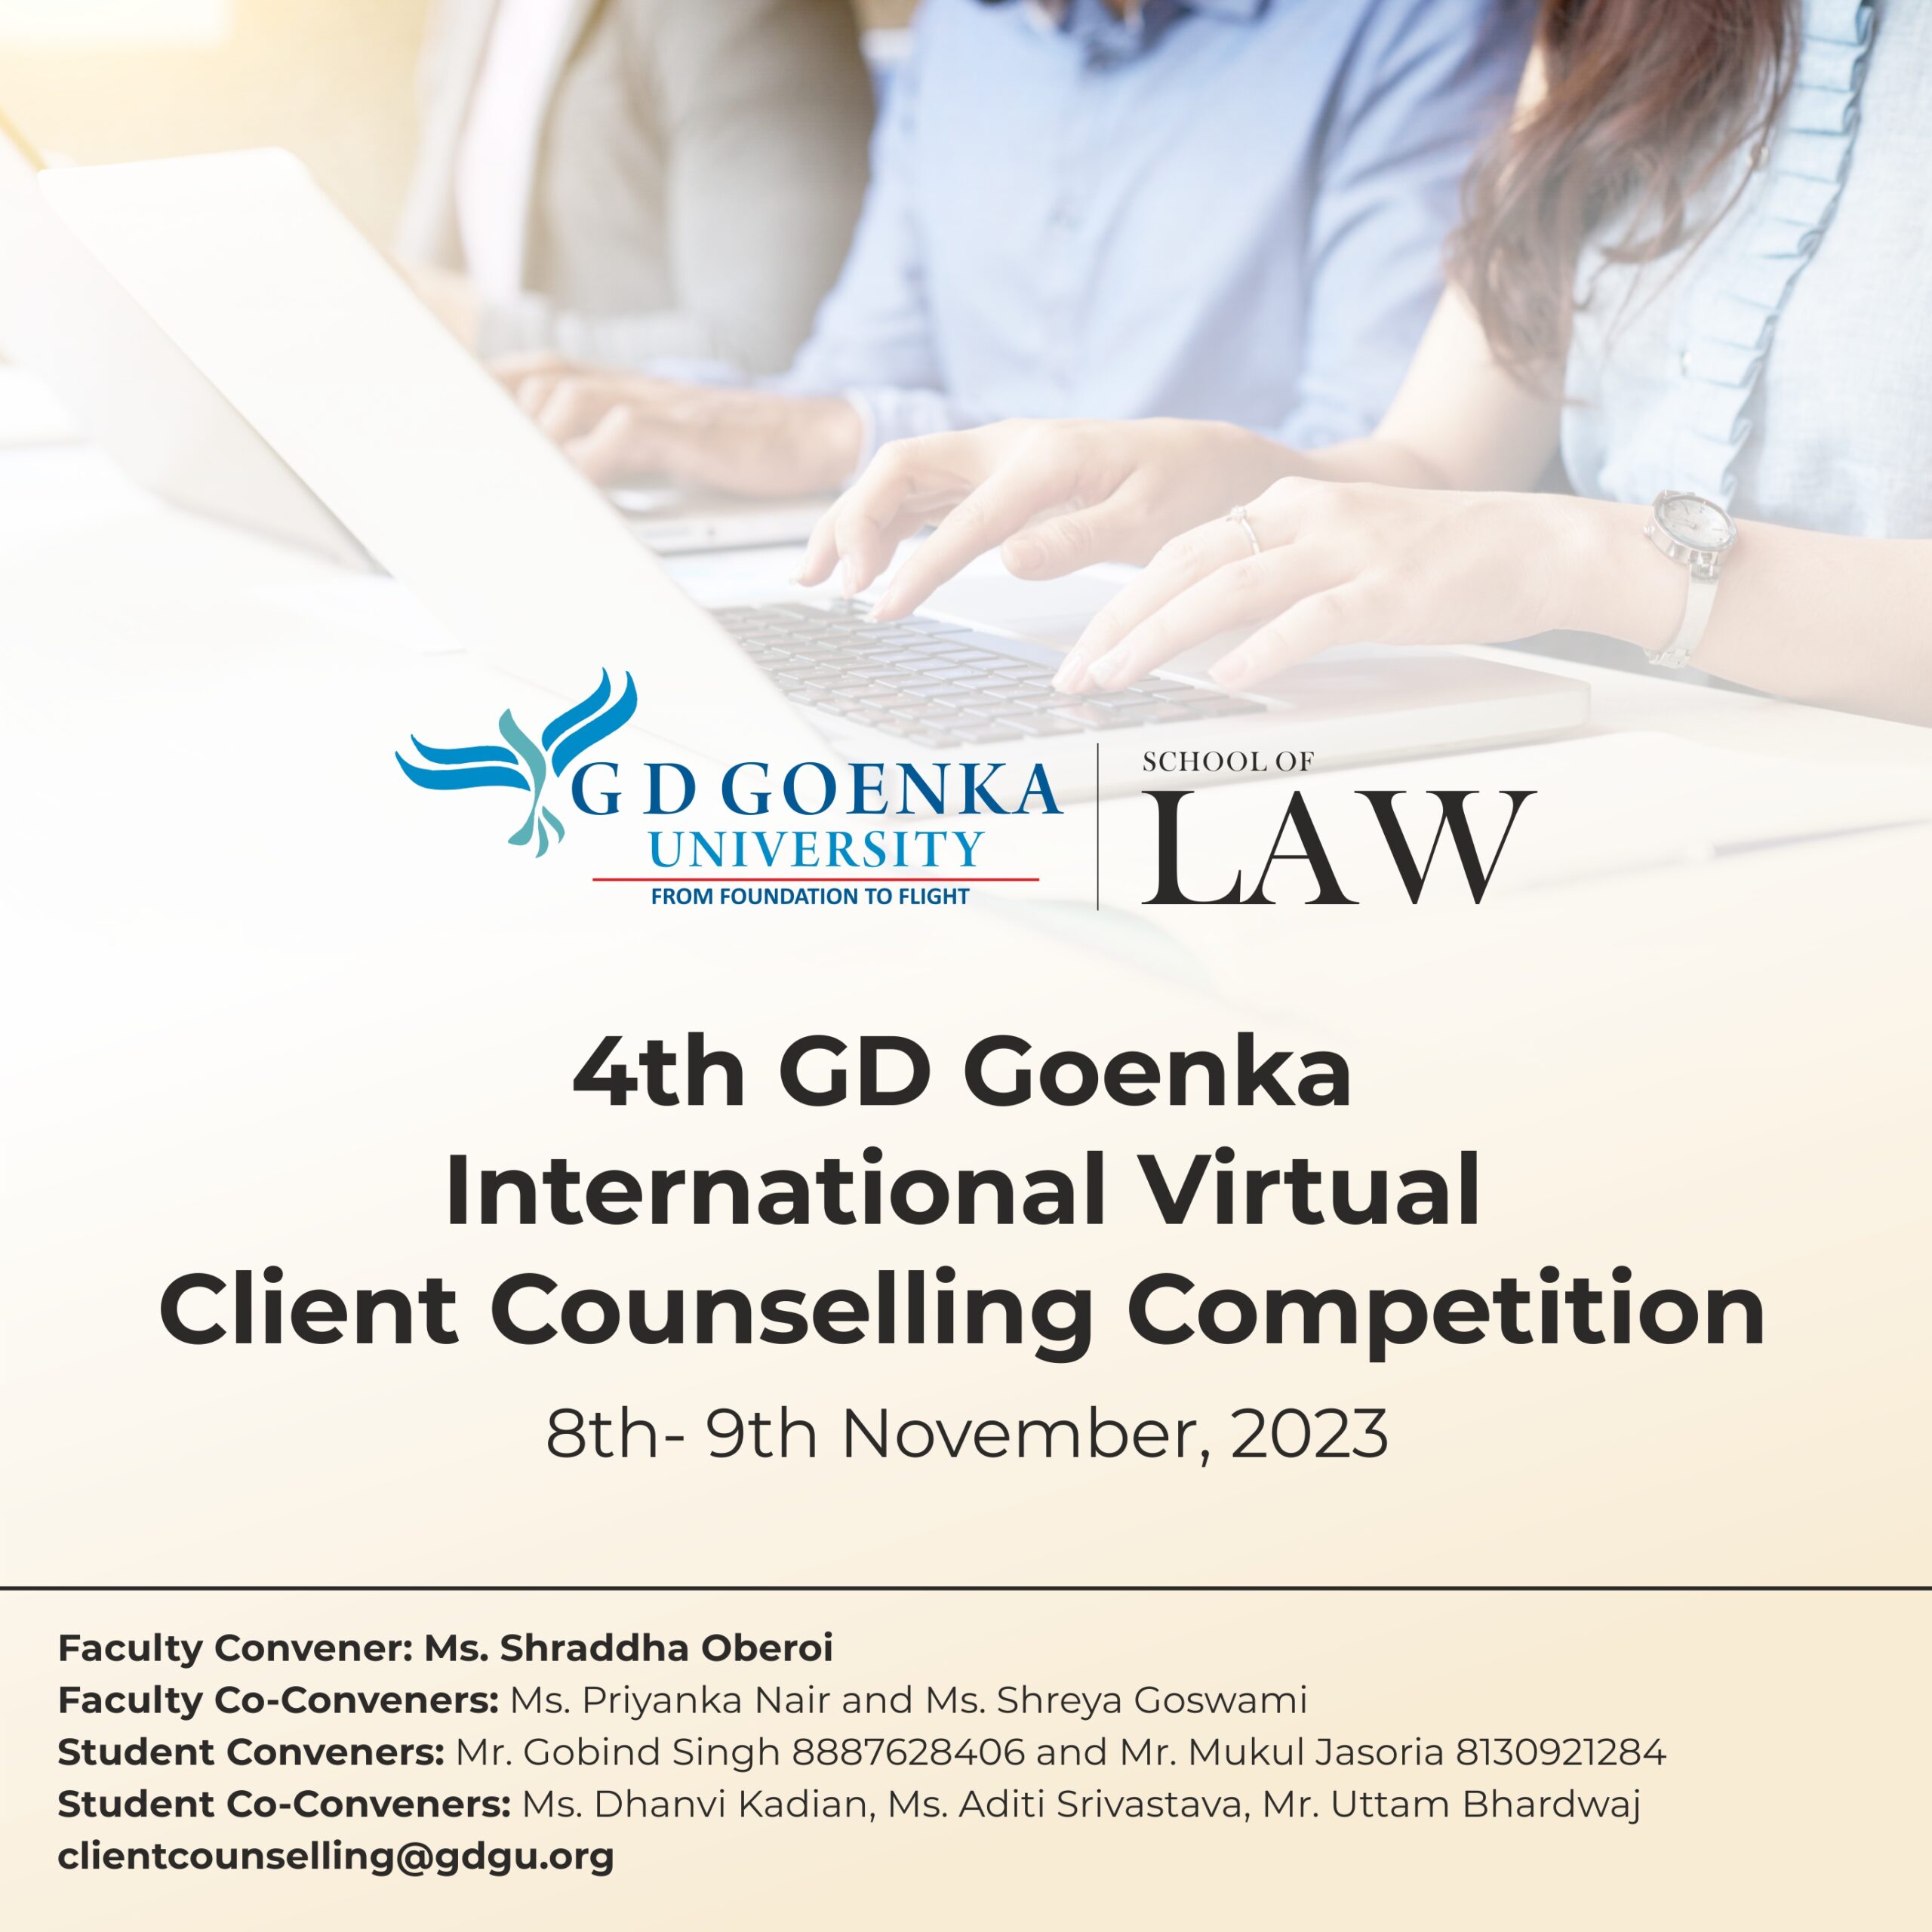 School of Law, GD Goenka University is organising “4th GD Goenka International Virtual Client Counselling Competition” from 8th-9th November, 2023!